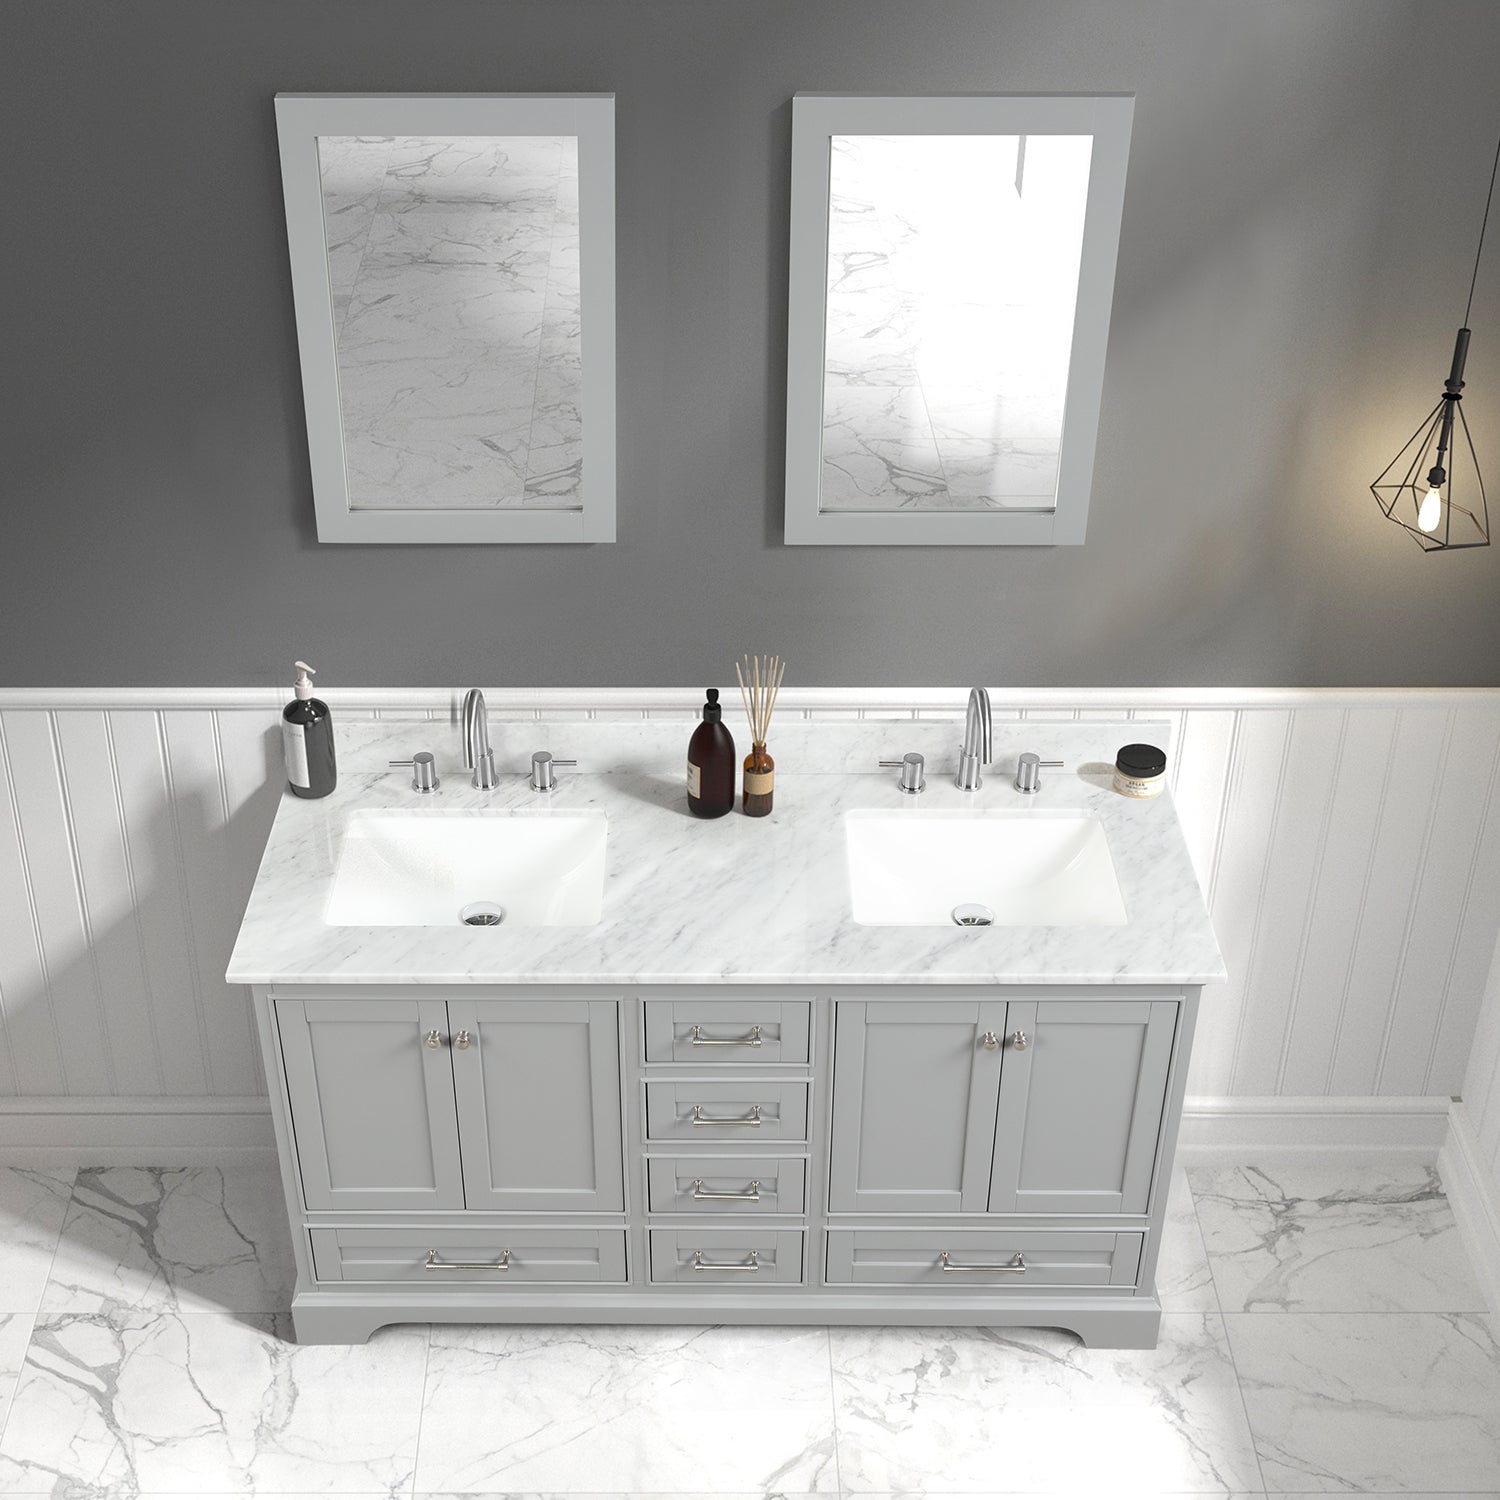 Stylish double faucet vanities, including wall-mounted double sink options to explore!